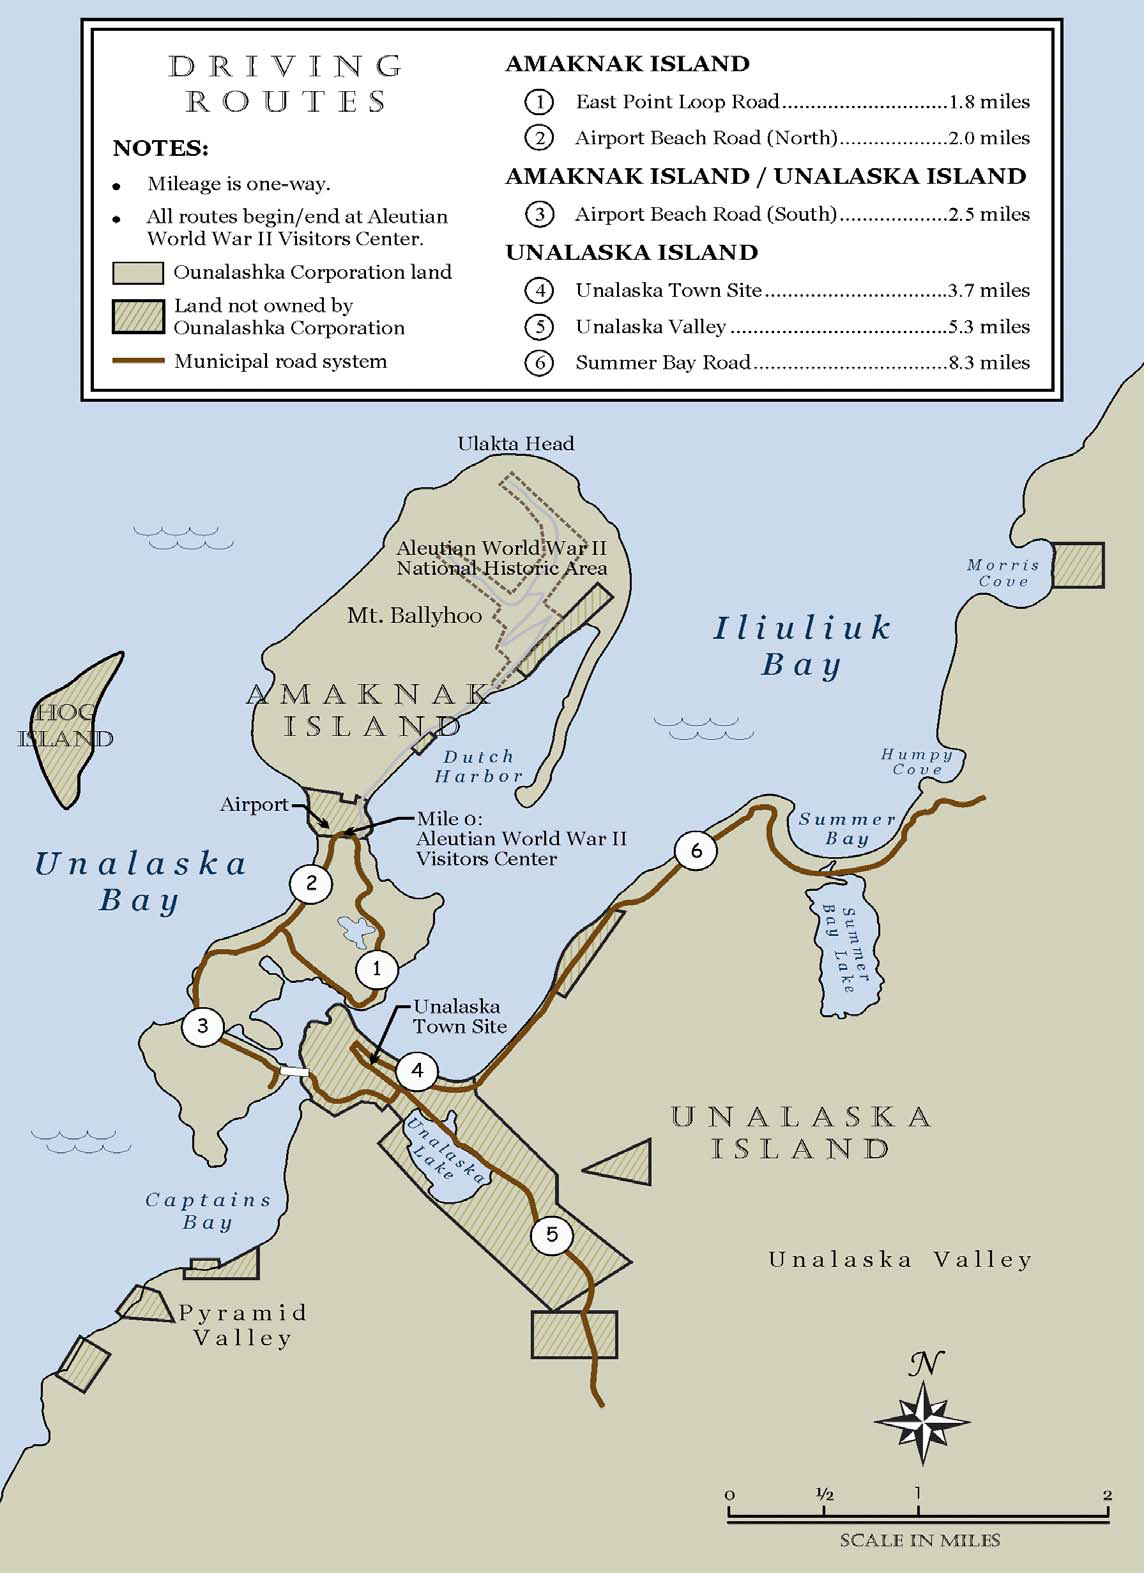 map of Unalaska island and Amaknak Island showing general location of 6 driving routes